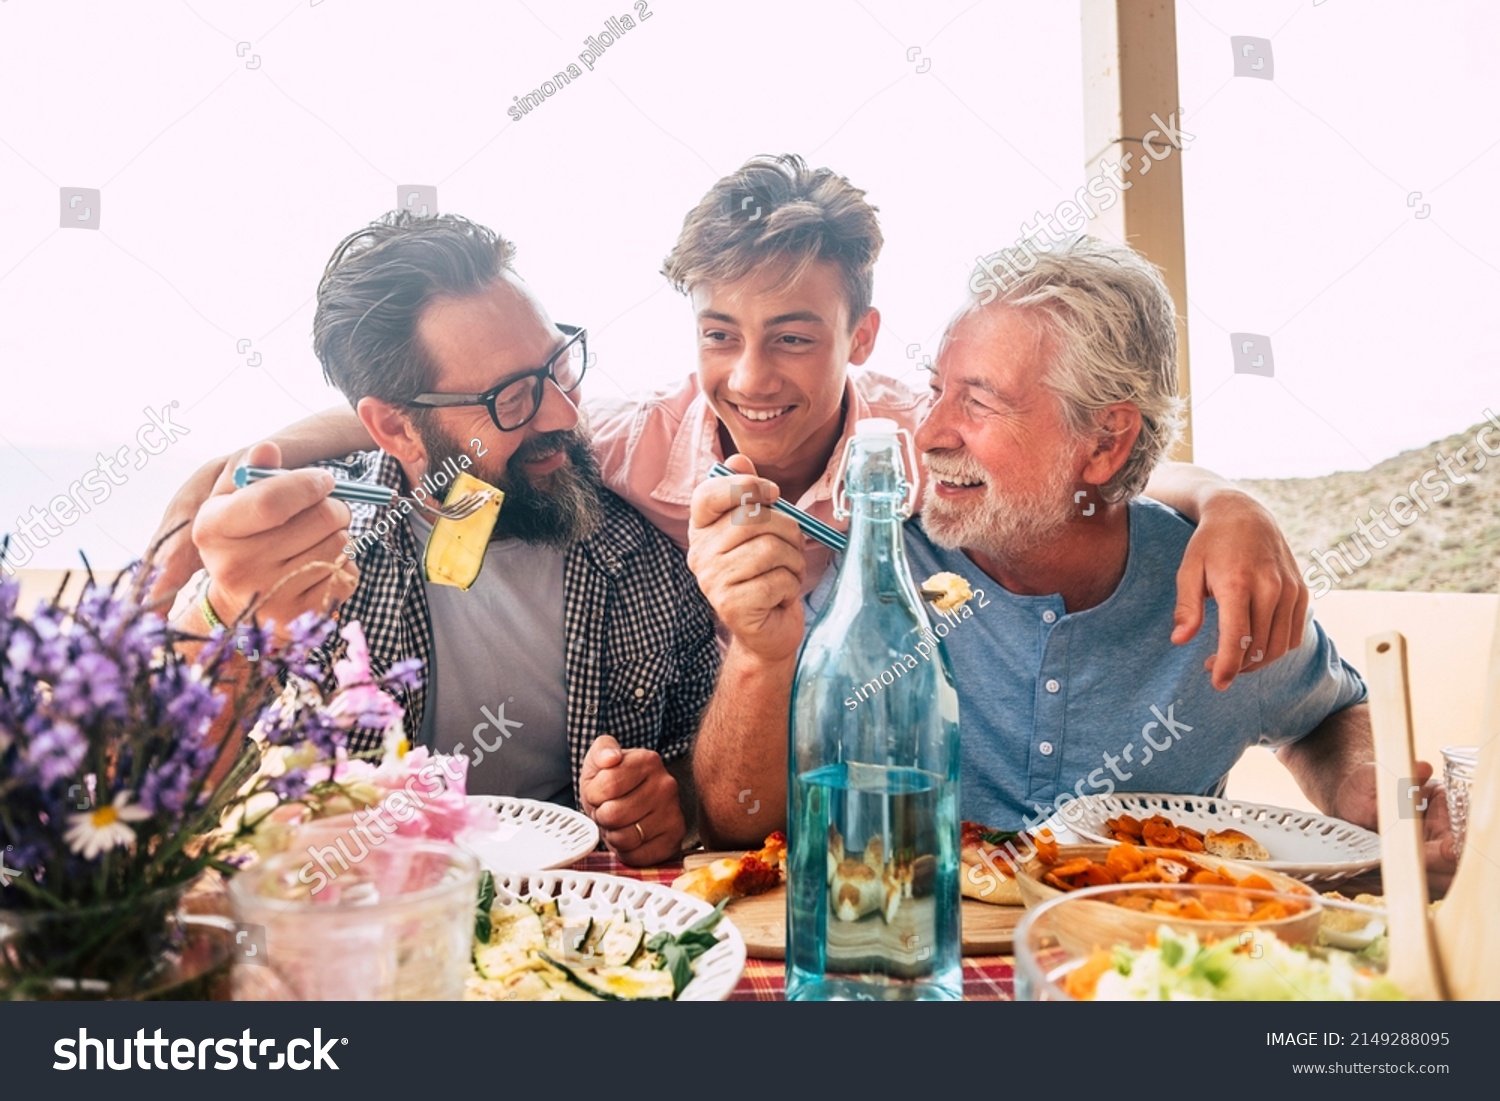 Father grandfather and son eaing together having fun. father's day concept celebration with men family enjoying meal on the table. Cheerful man young adult and mature laughing and having lunch #2149288095